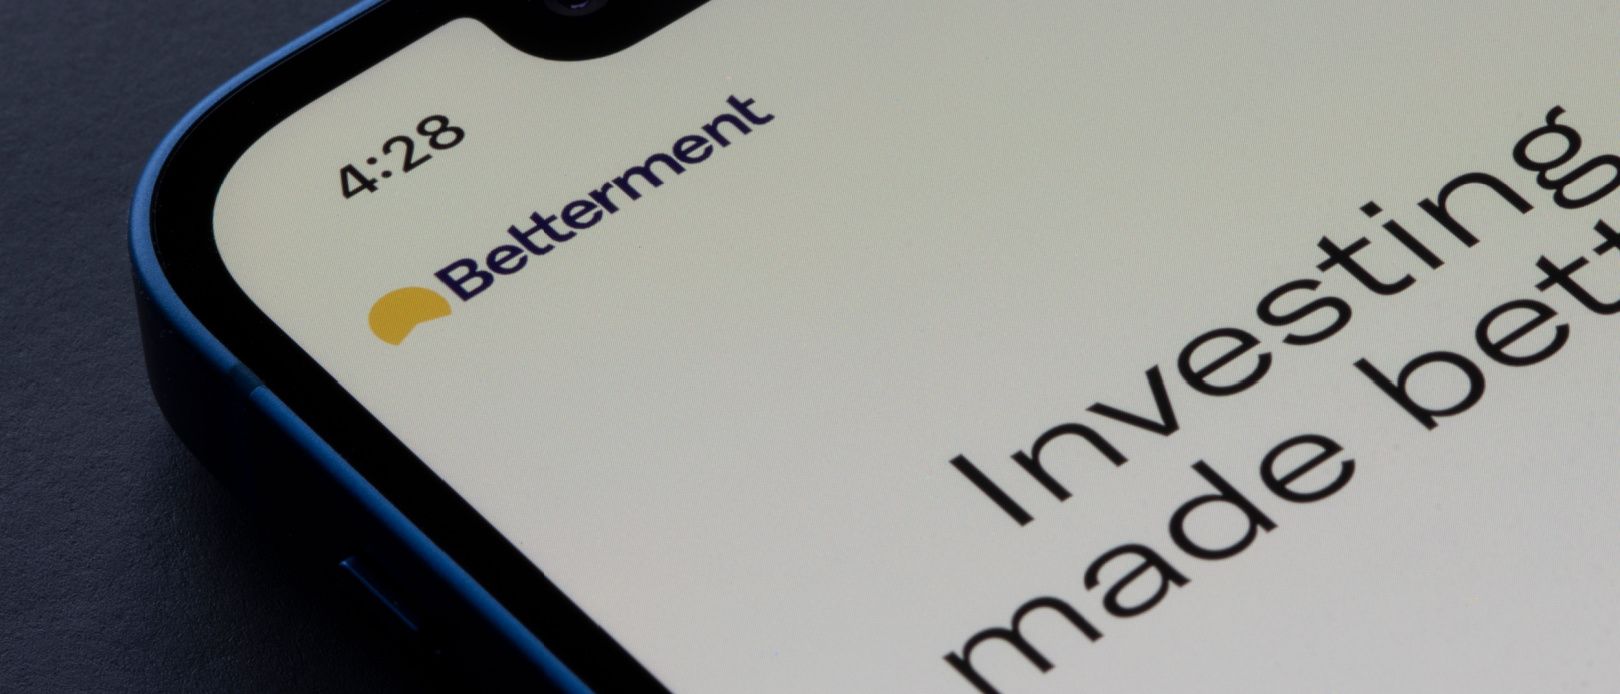 Closeup of Betterment logo seen on its app login page on an iPhone. Betterment is a financial advisory company providing robo-advising and cash management